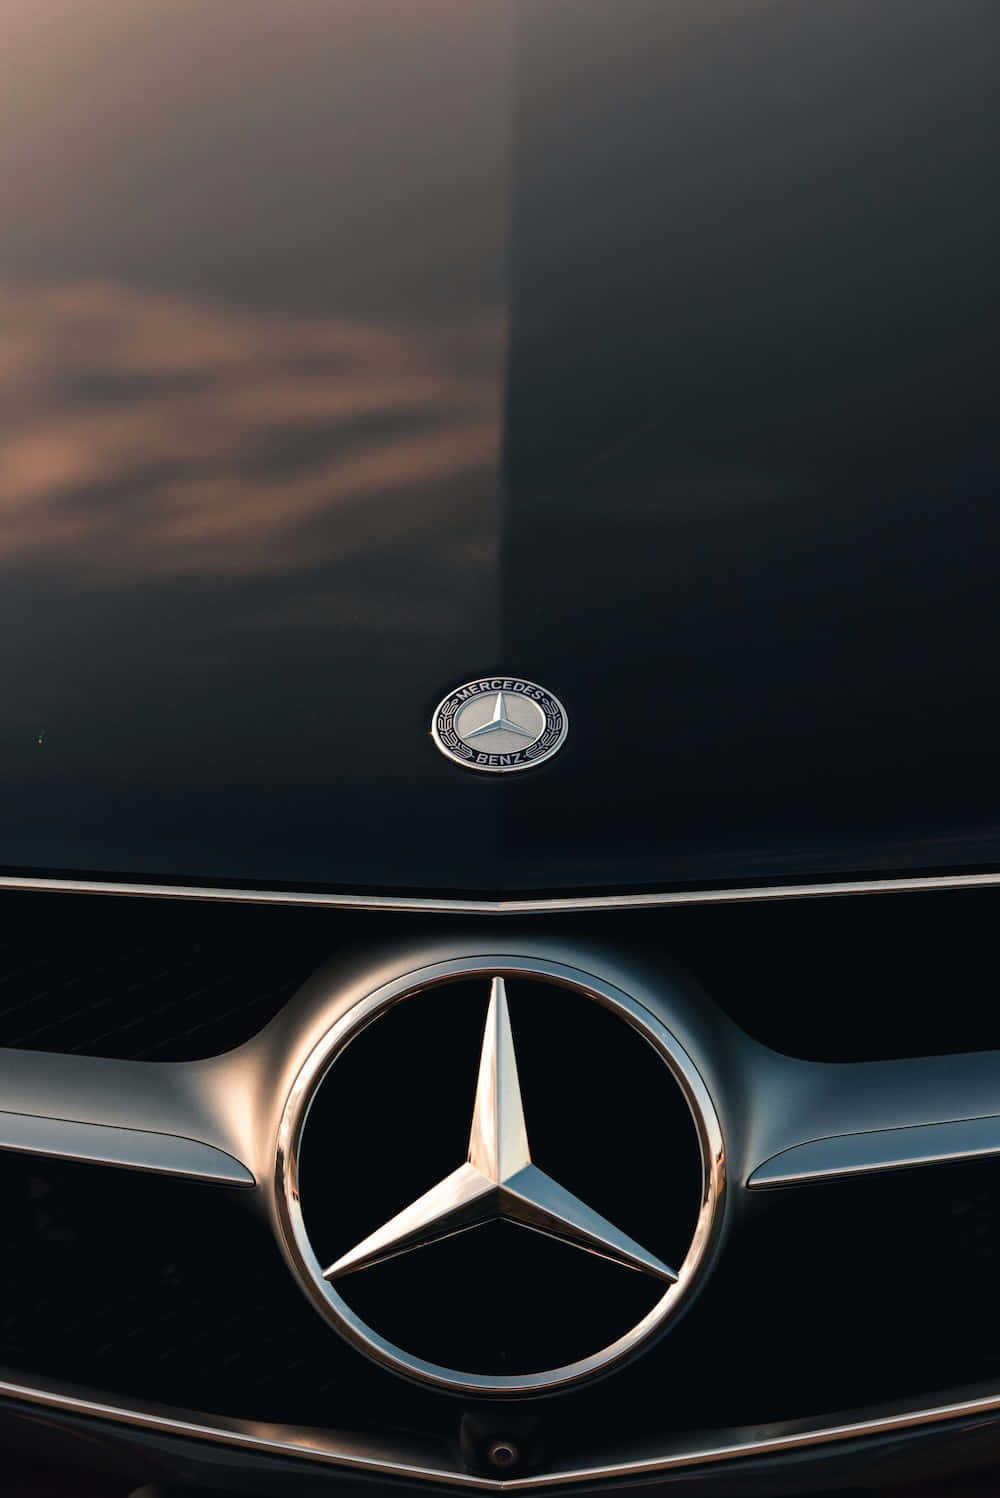 Best Mercedes Background Glossy Bumper With Logo